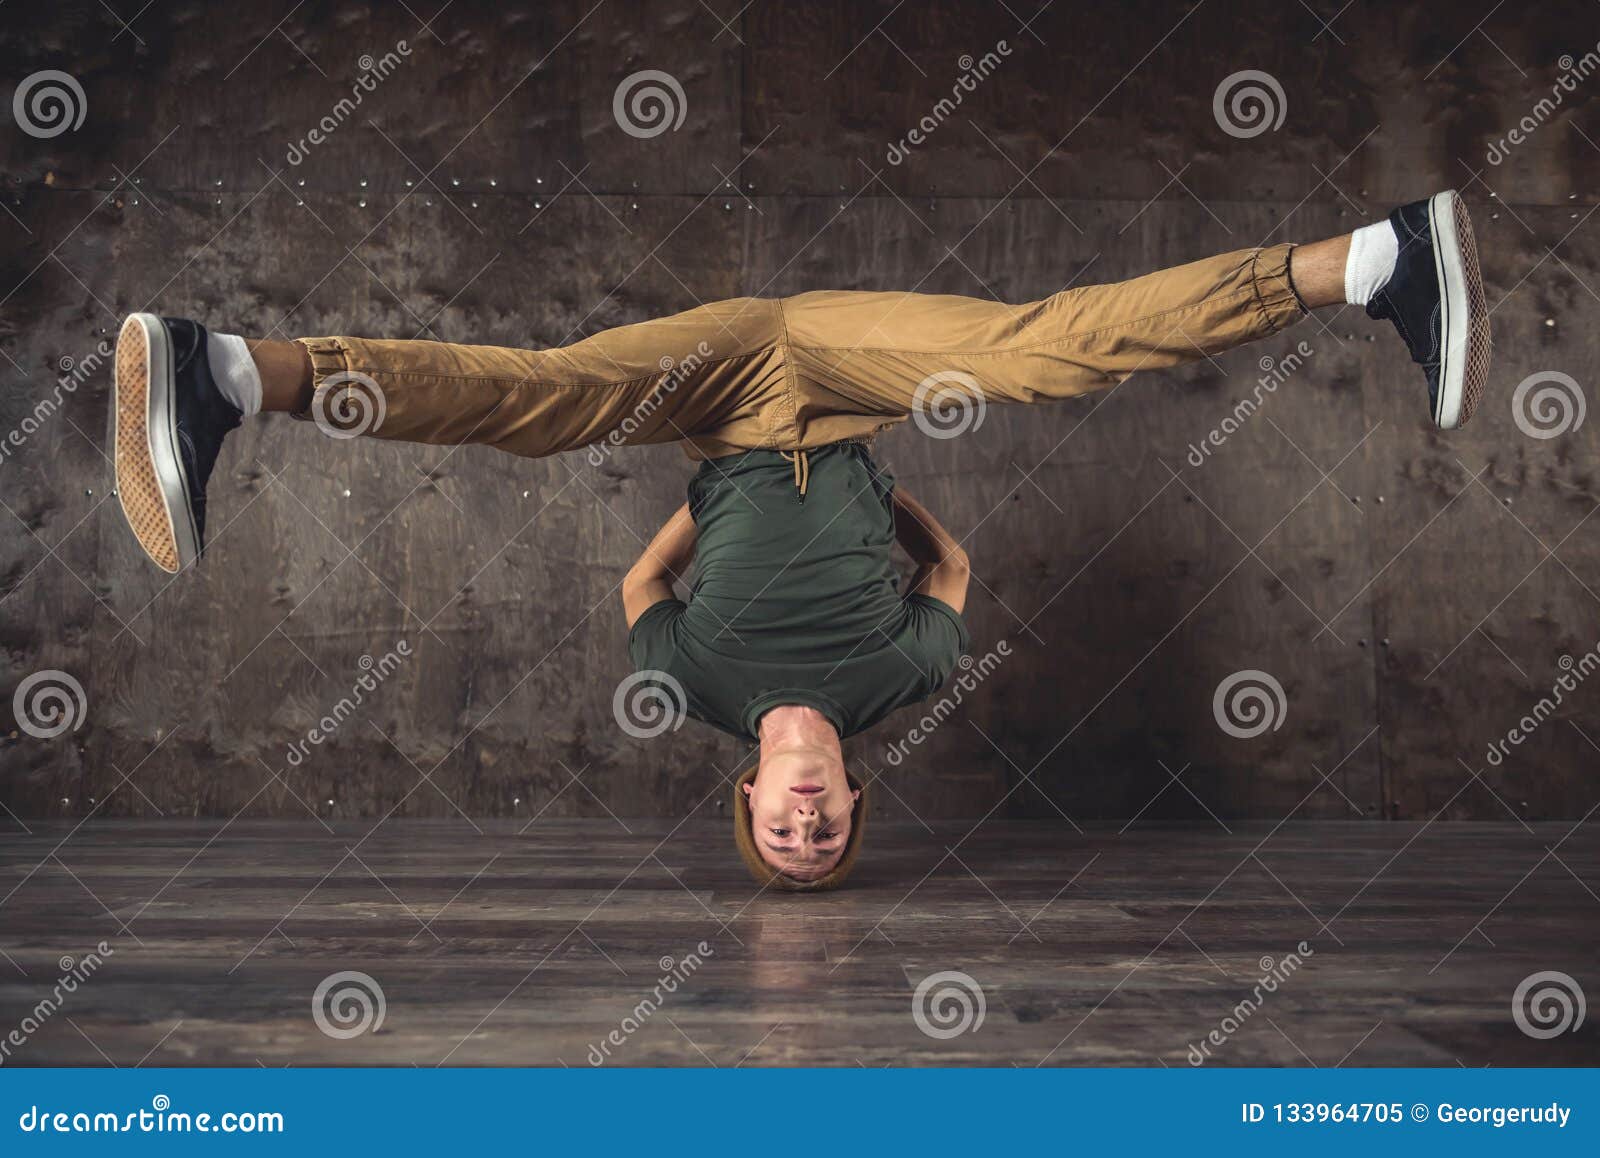 Break Dance stock image. Image of people, action, person - 133964705